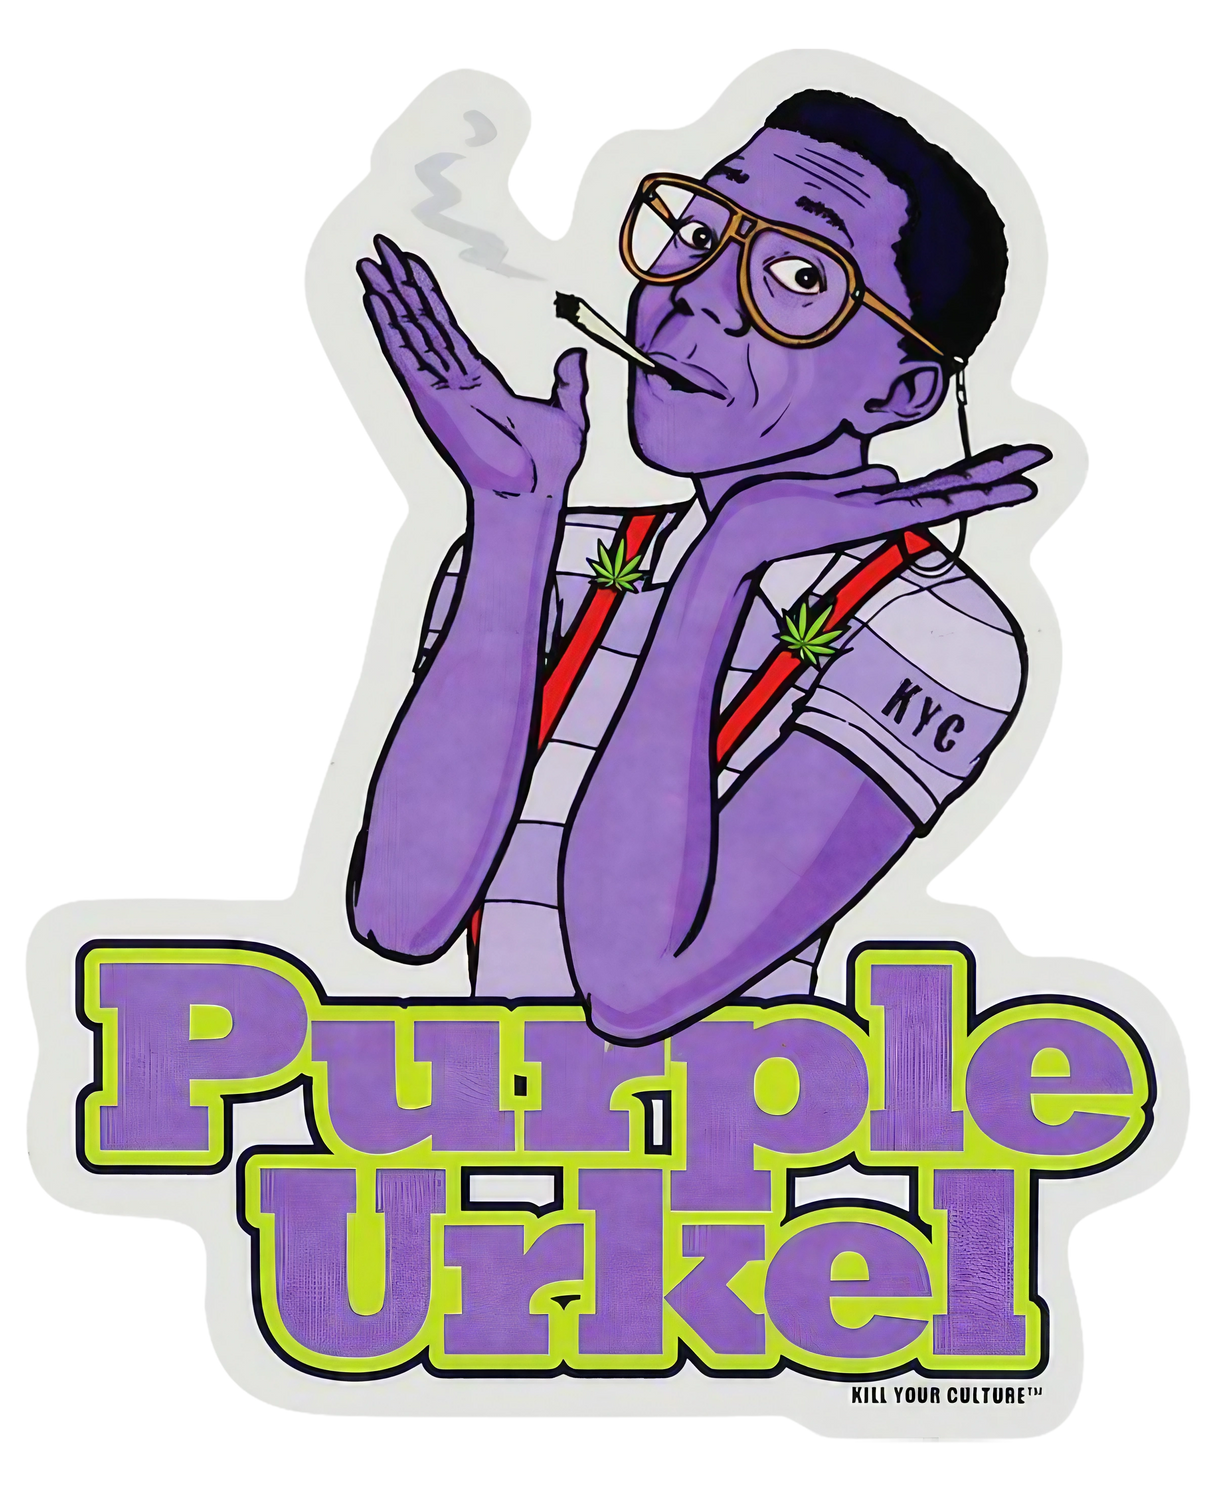 Medium-sized Purple Urkel vinyl sticker with vibrant colors and heavy wall thickness